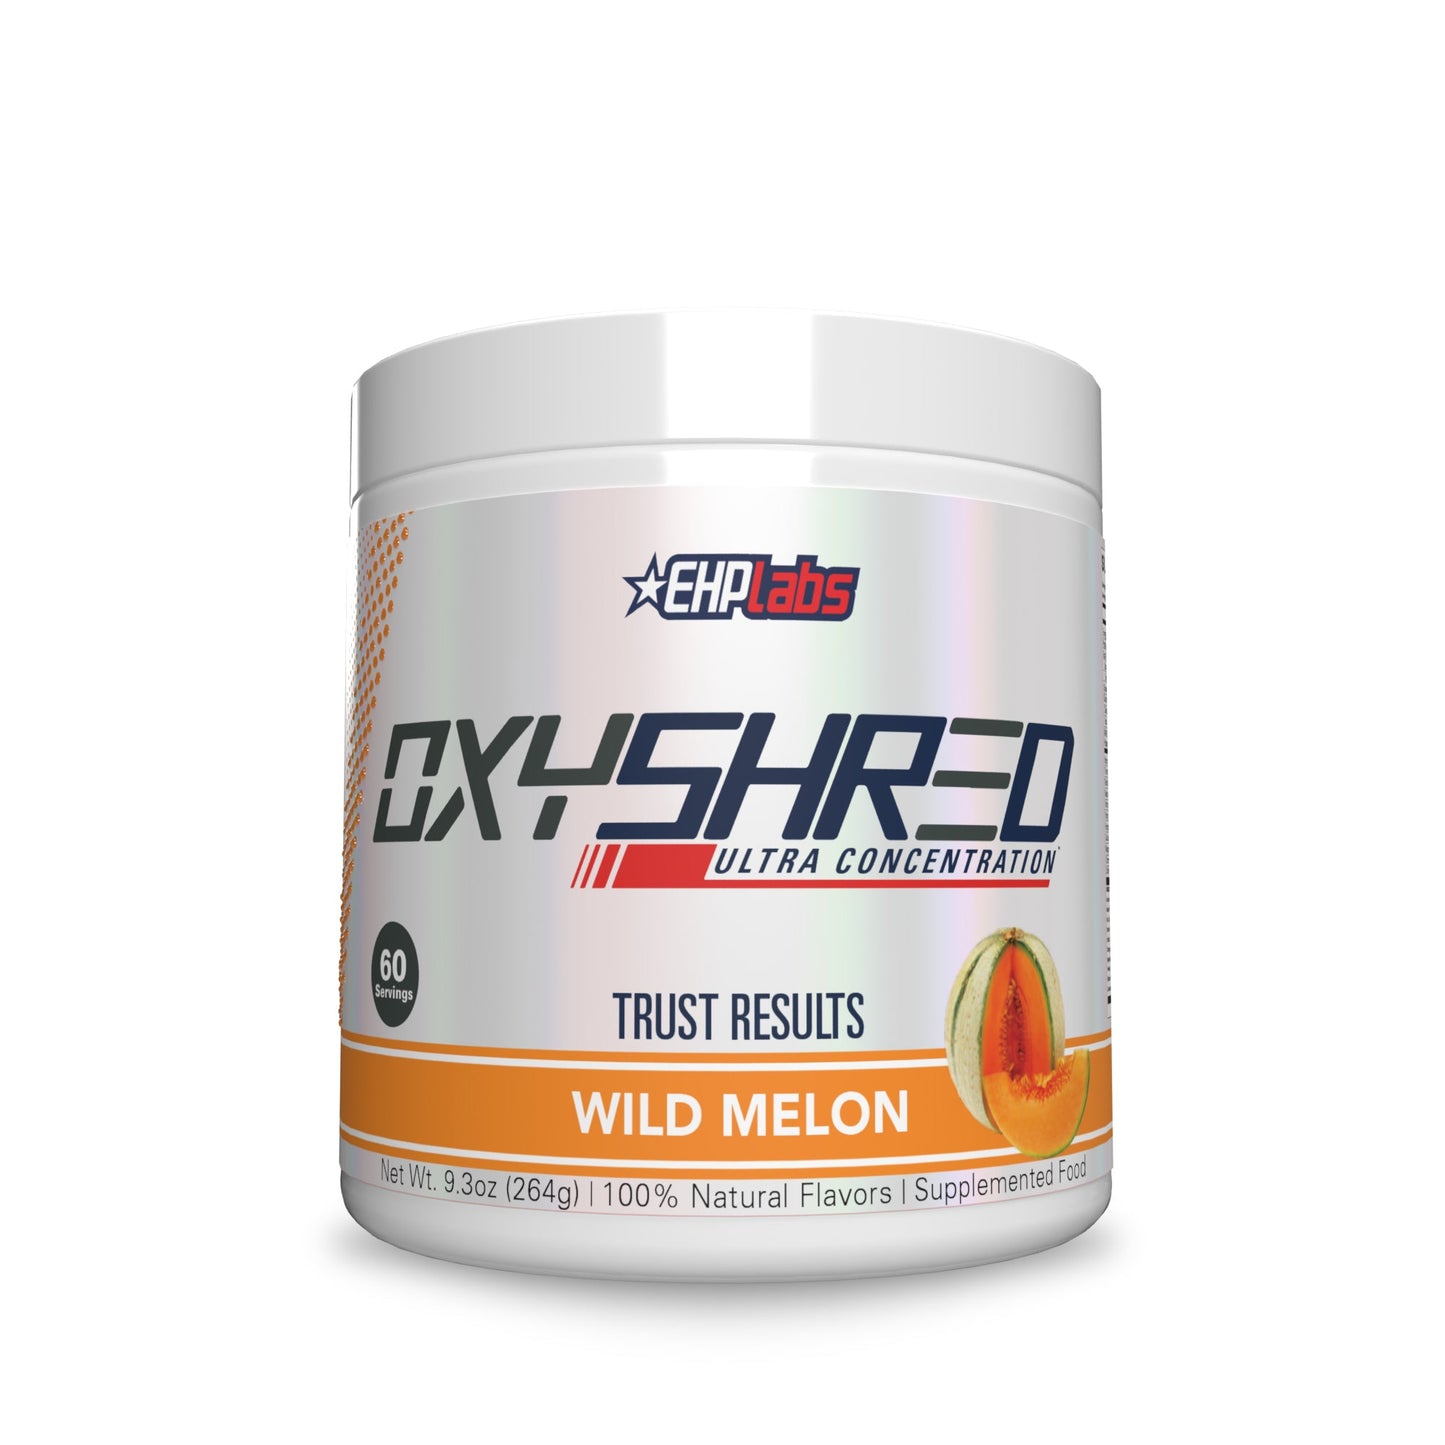 EHP Labs OxyShred Ultra Concentration 60 Serves - Supplements - Wild Melon - The Cave Gym